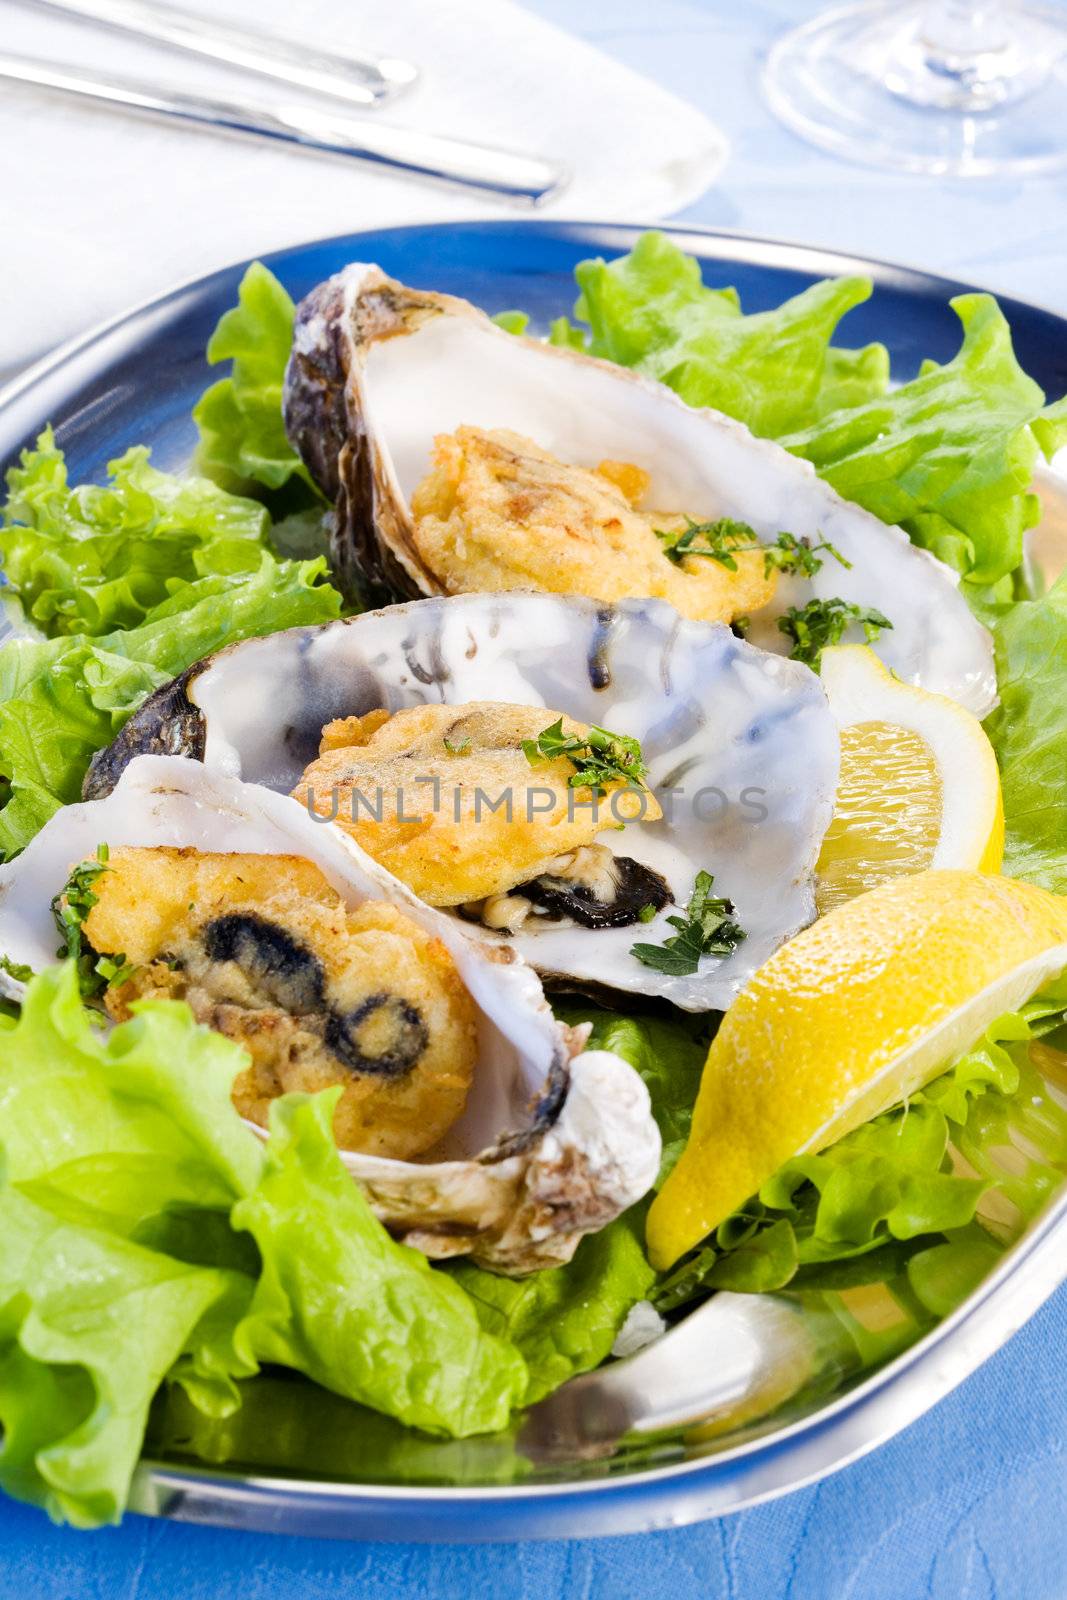 Oysters with lemon, spicery and salad on plate